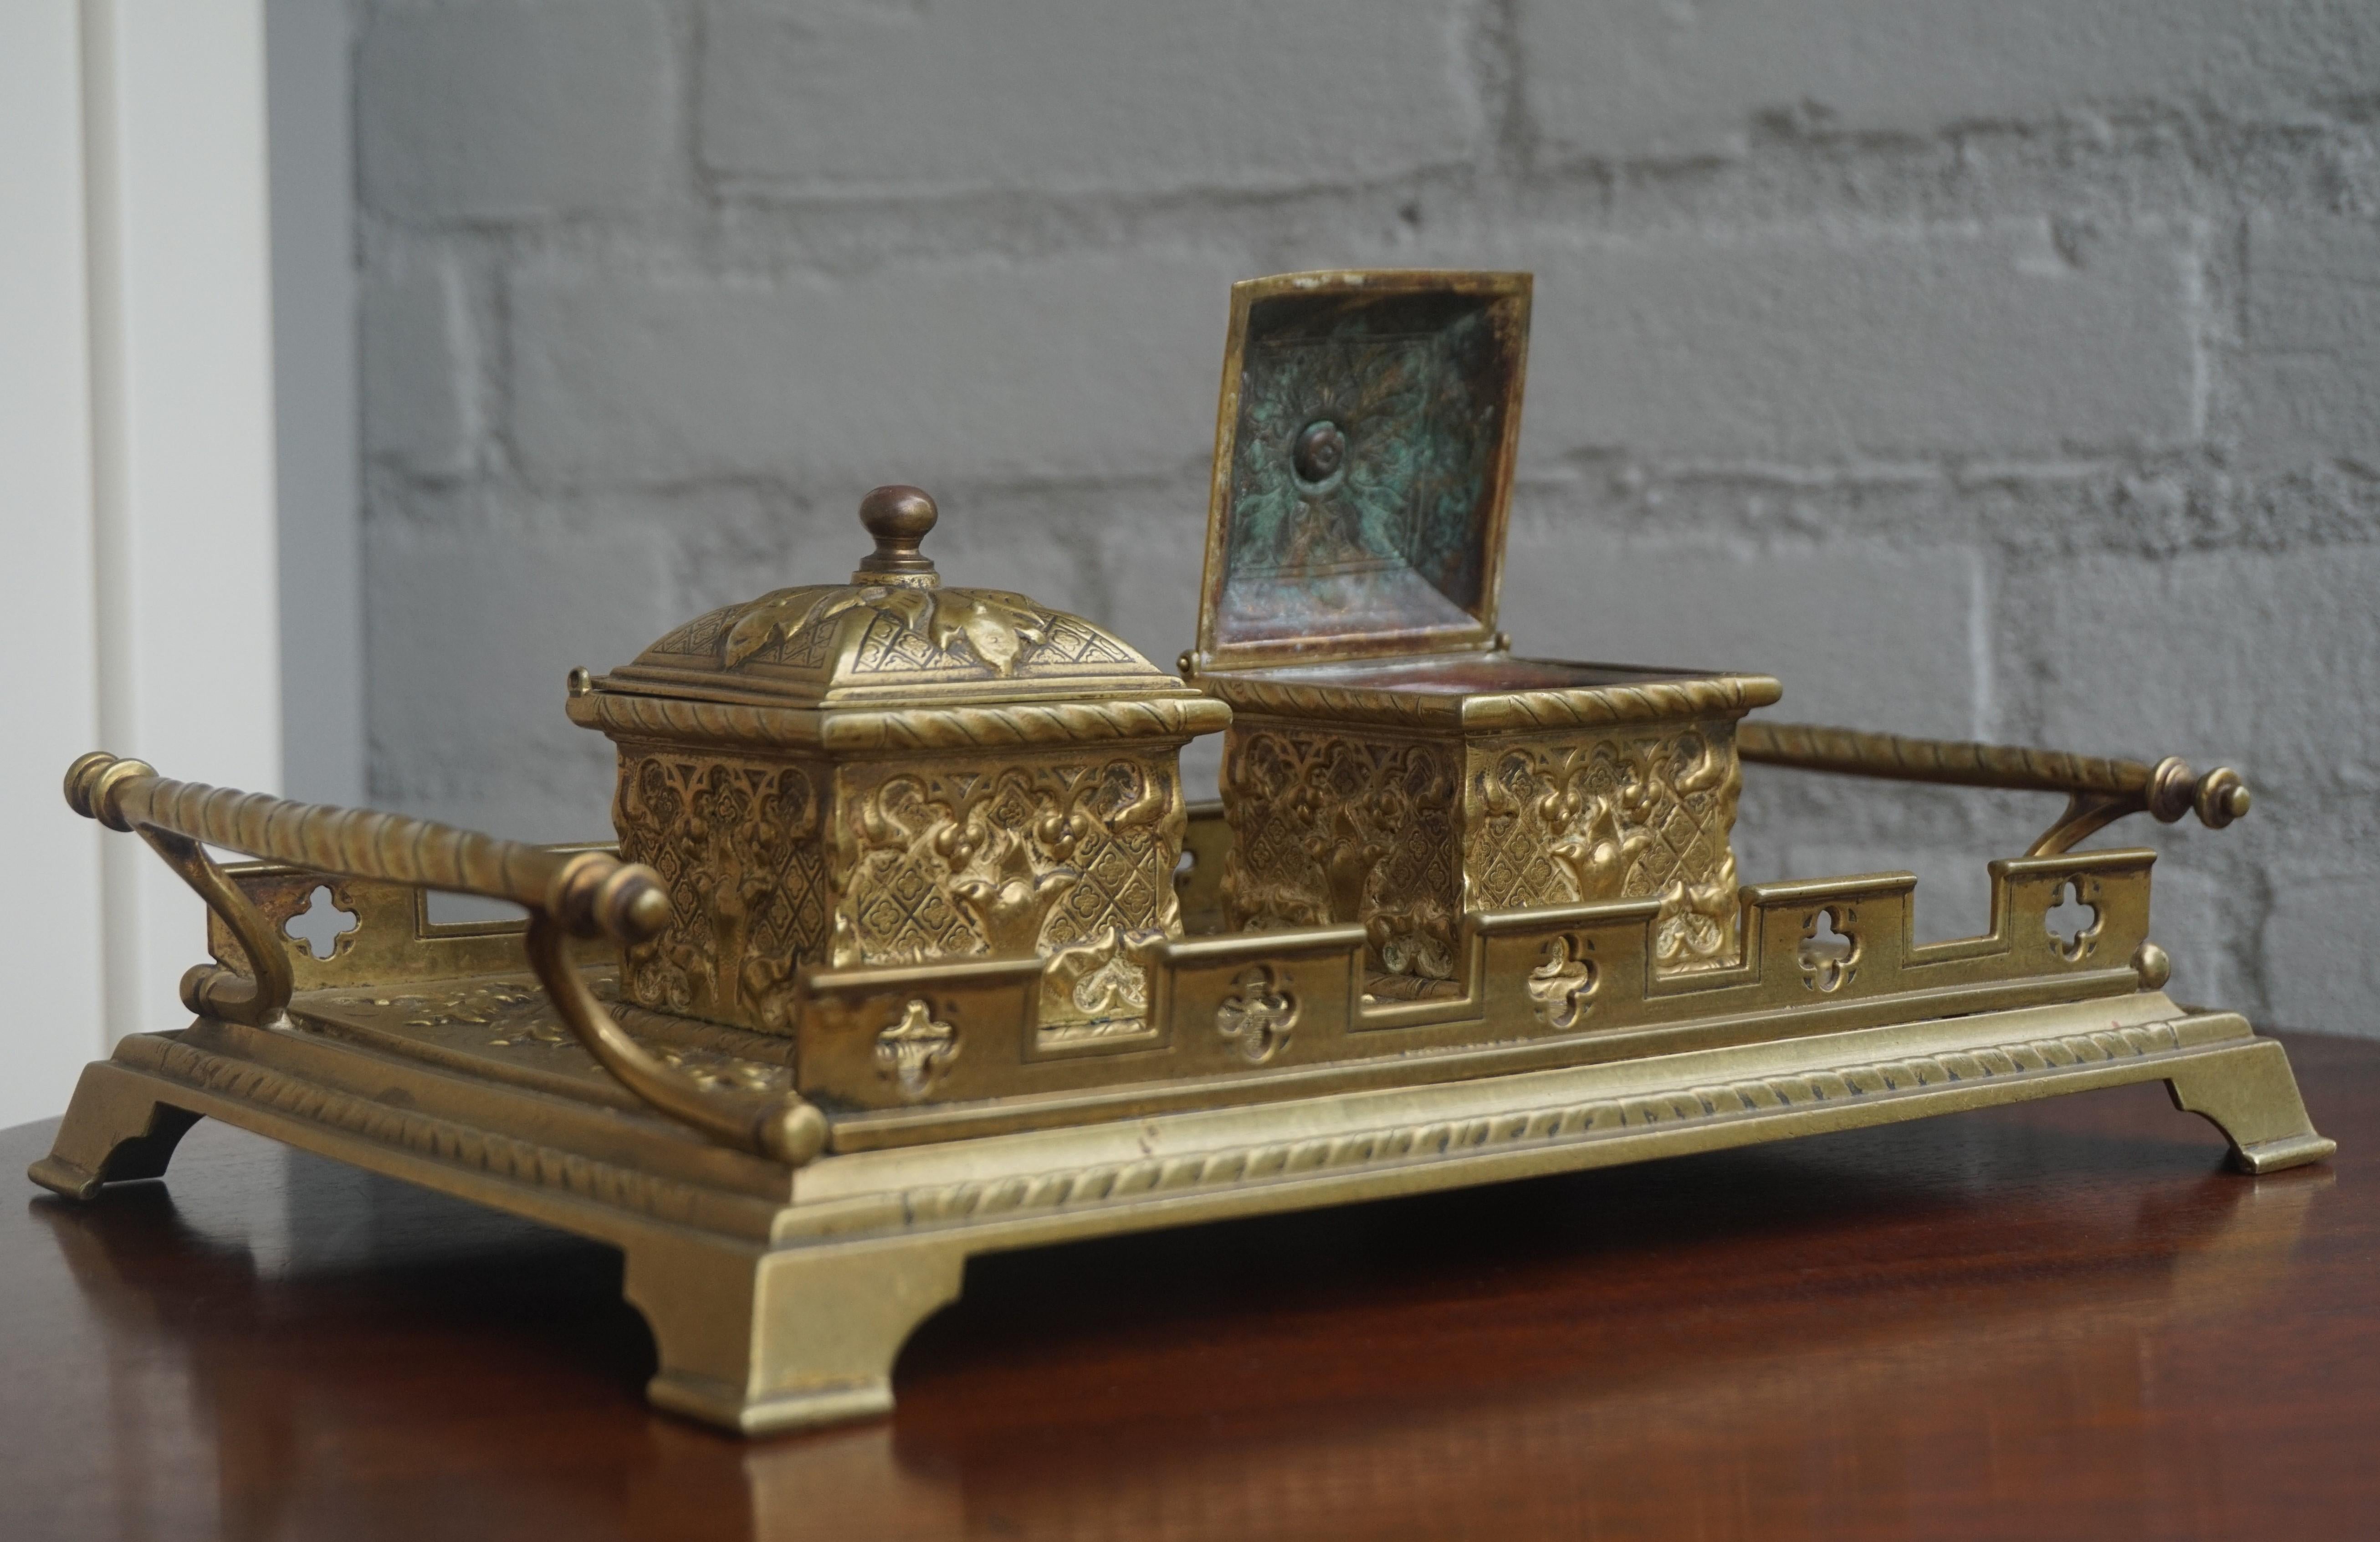 Another rare antique for the collectors and enthusiasts of Gothic art.

This sizeable and very stylish inkstand was all-handcrafted in the late 19th century and it could hardly be in better condition. This top quality made desk piece could be the